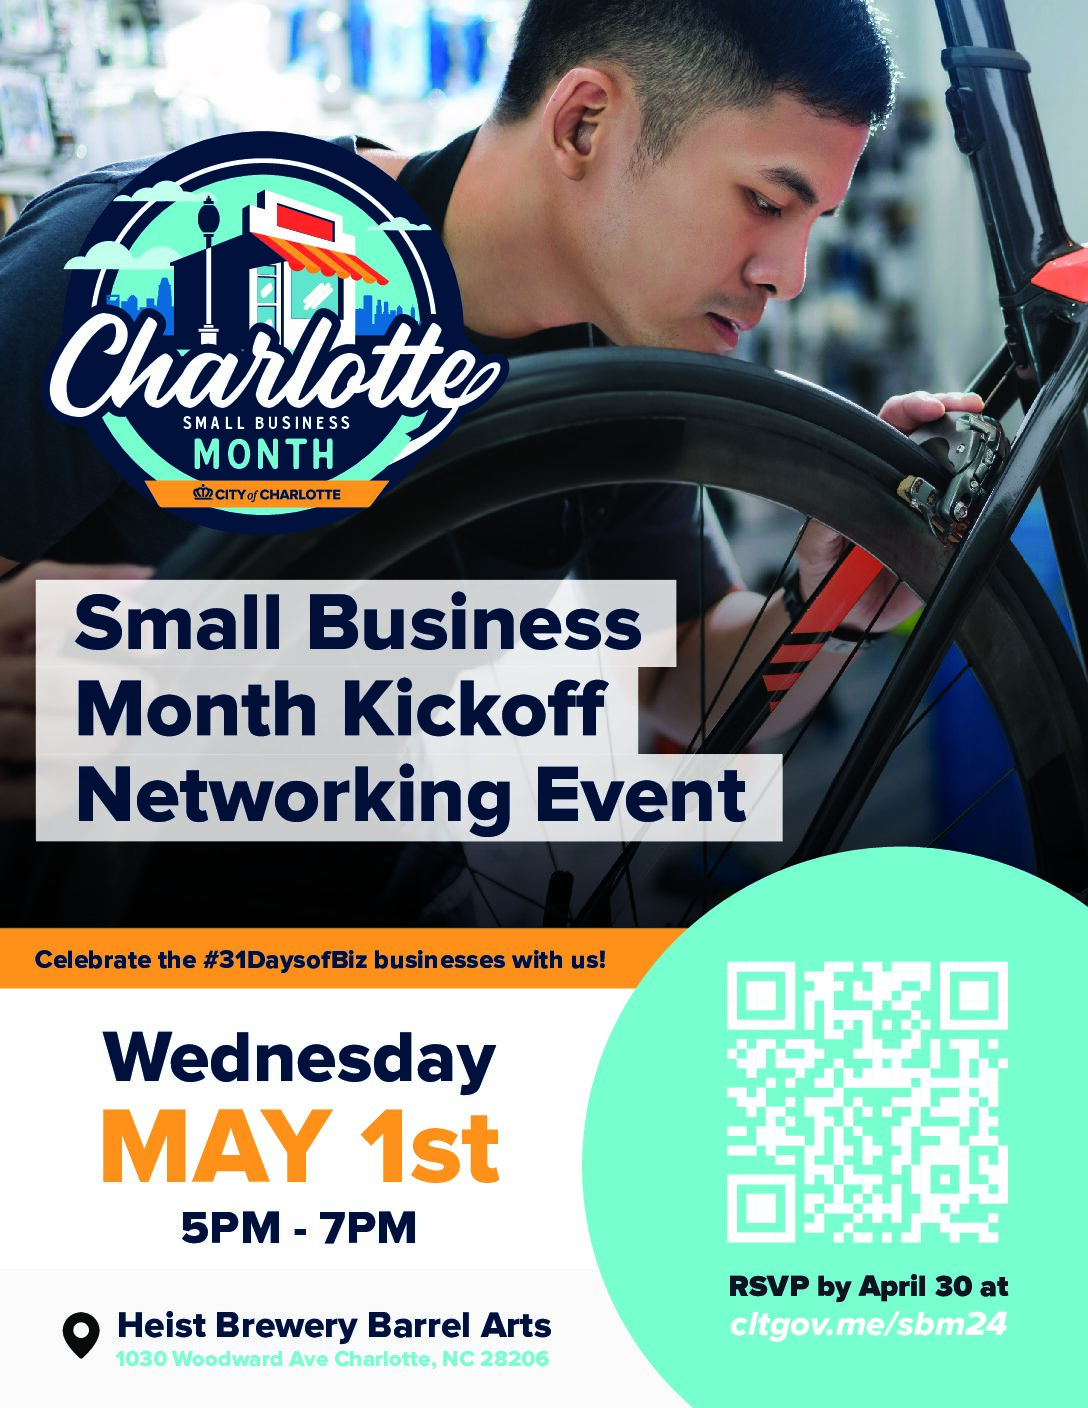 Small Business Month Kickoff Networking Event – Charlotte, NC